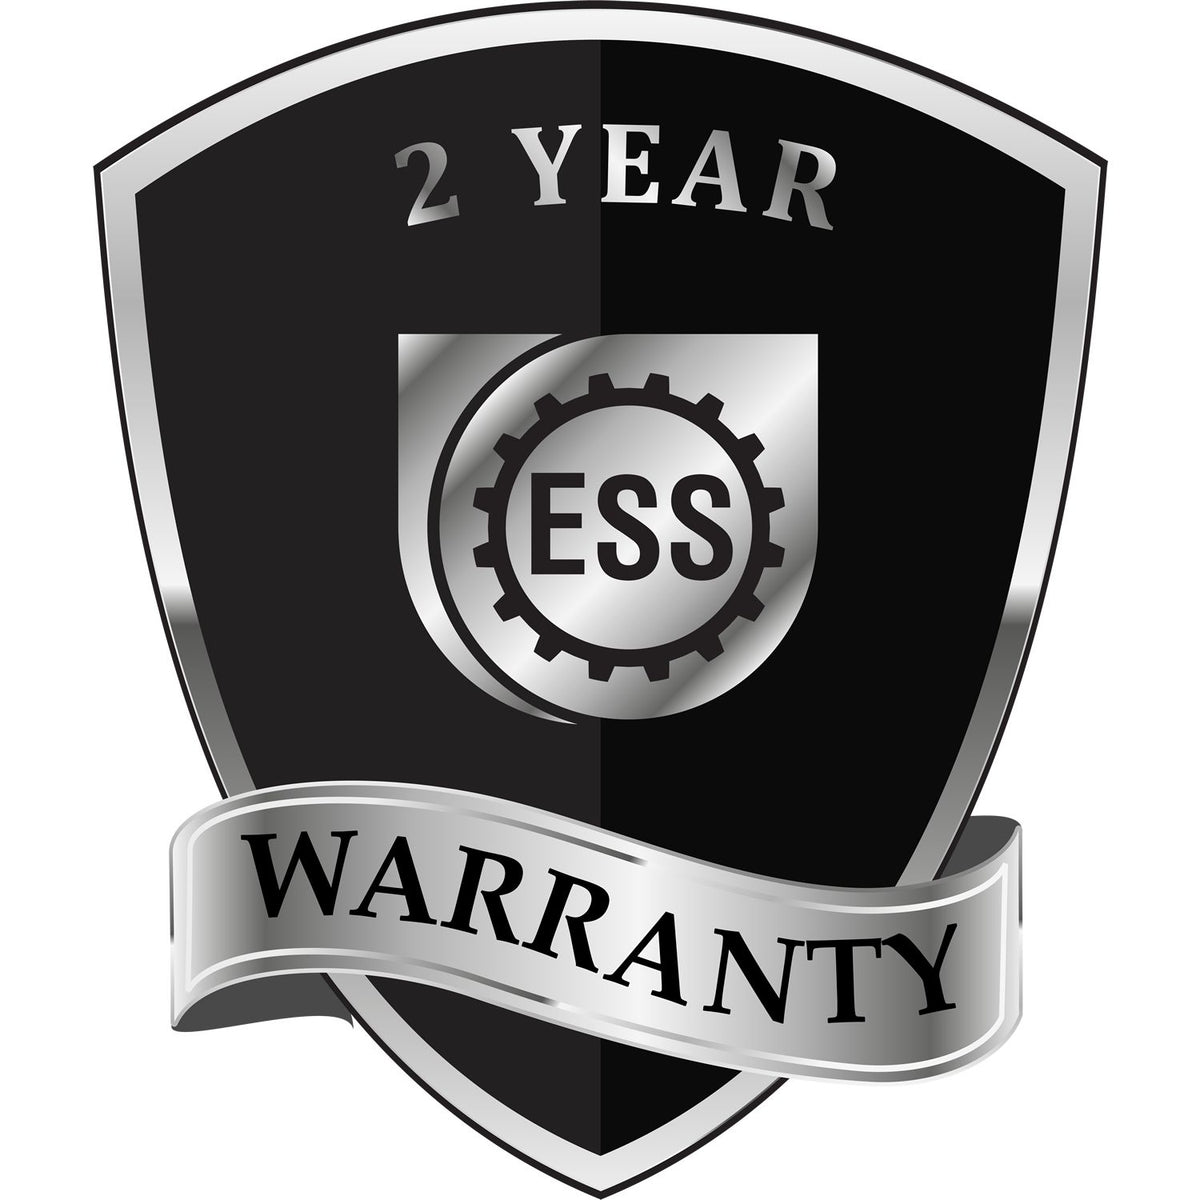 A badge or emblem showing a warranty icon for the Soft Maryland Professional Engineer Seal